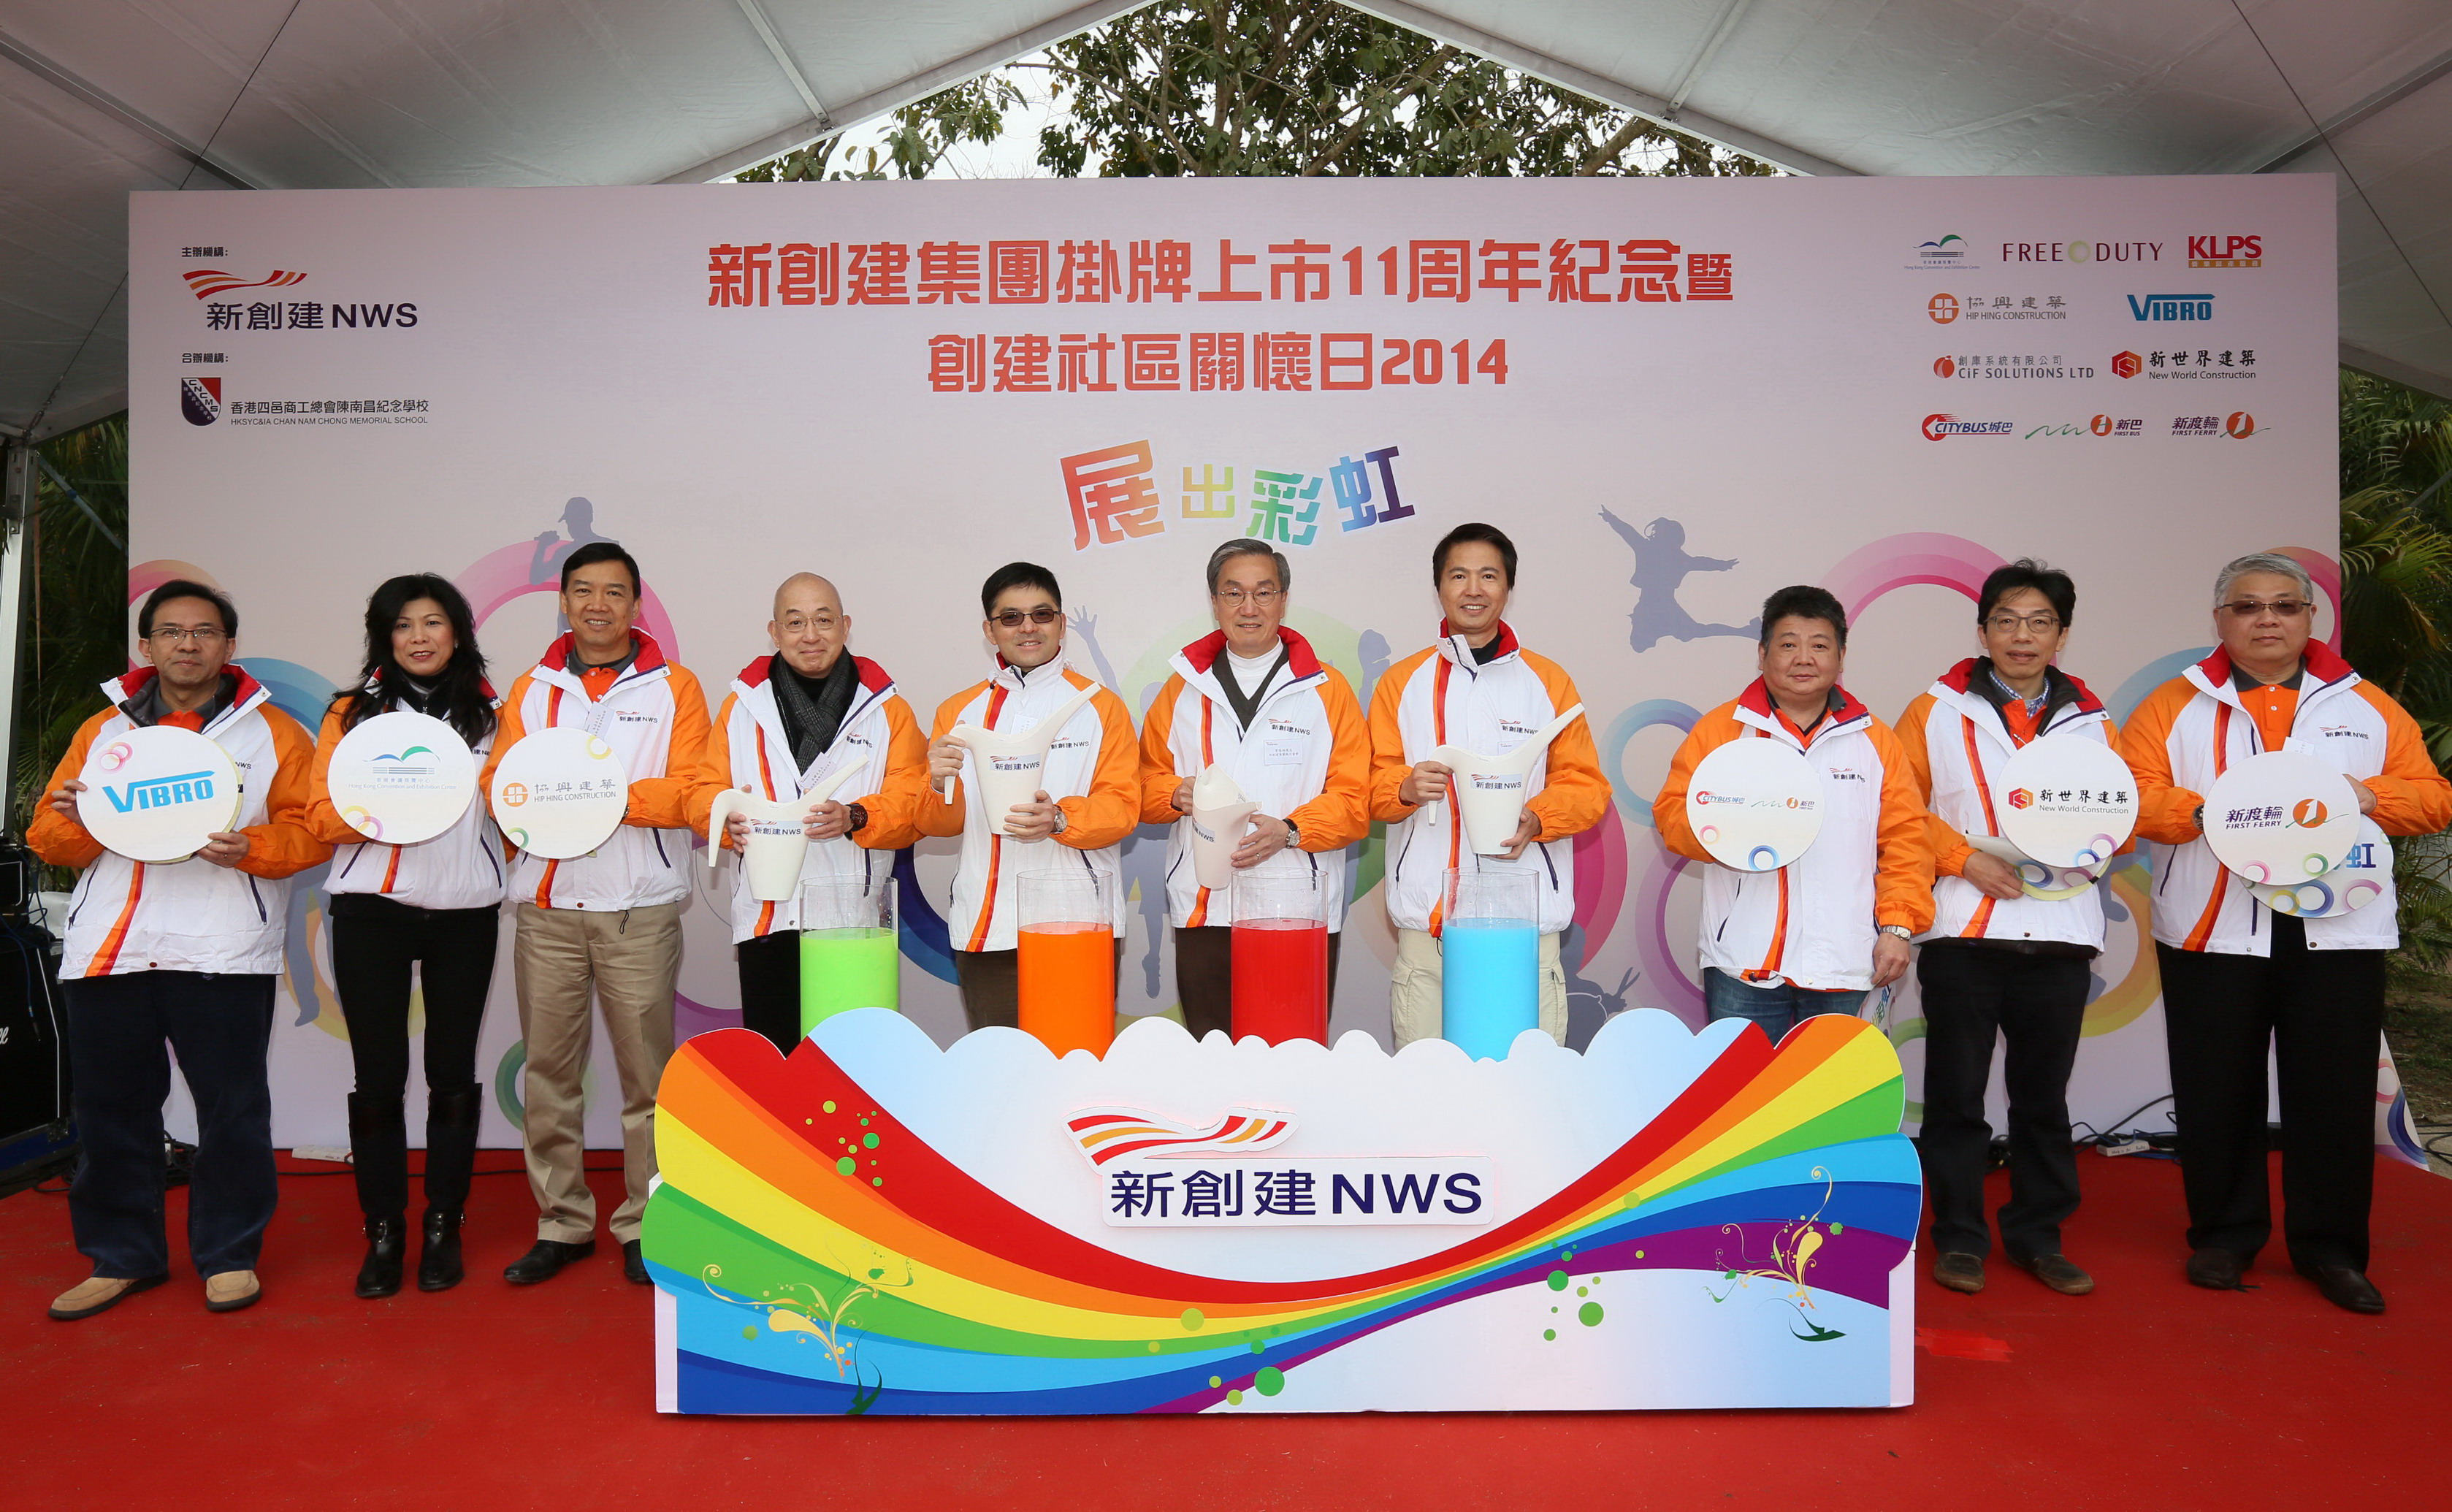 NWS Holdings holds Integration Carnival for the Mentally Disabled Students